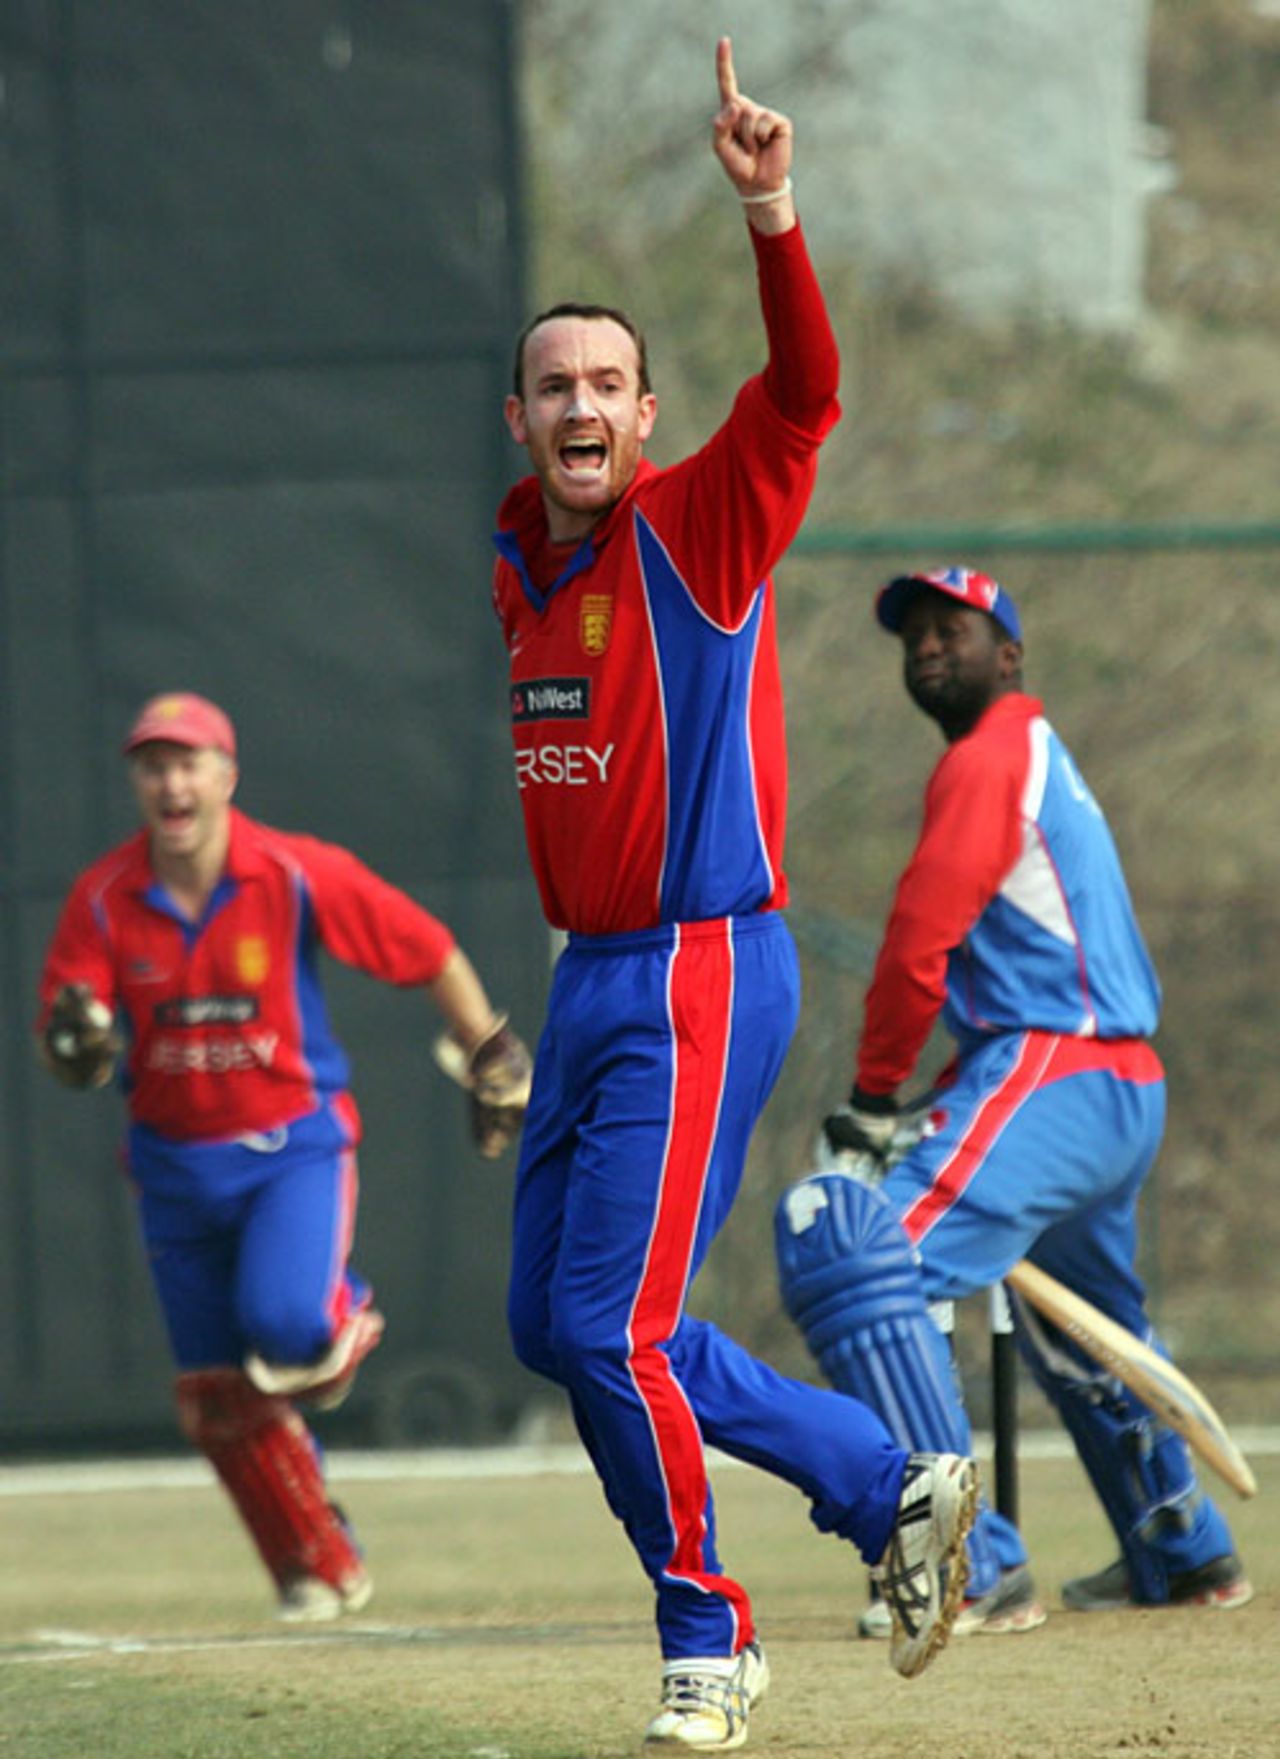 Ryan Driver is confident that he has Lennox Cush caught behind, Jersey v USA, ICC World Cricket League Division Five, Kirtipur, February 23, 2010